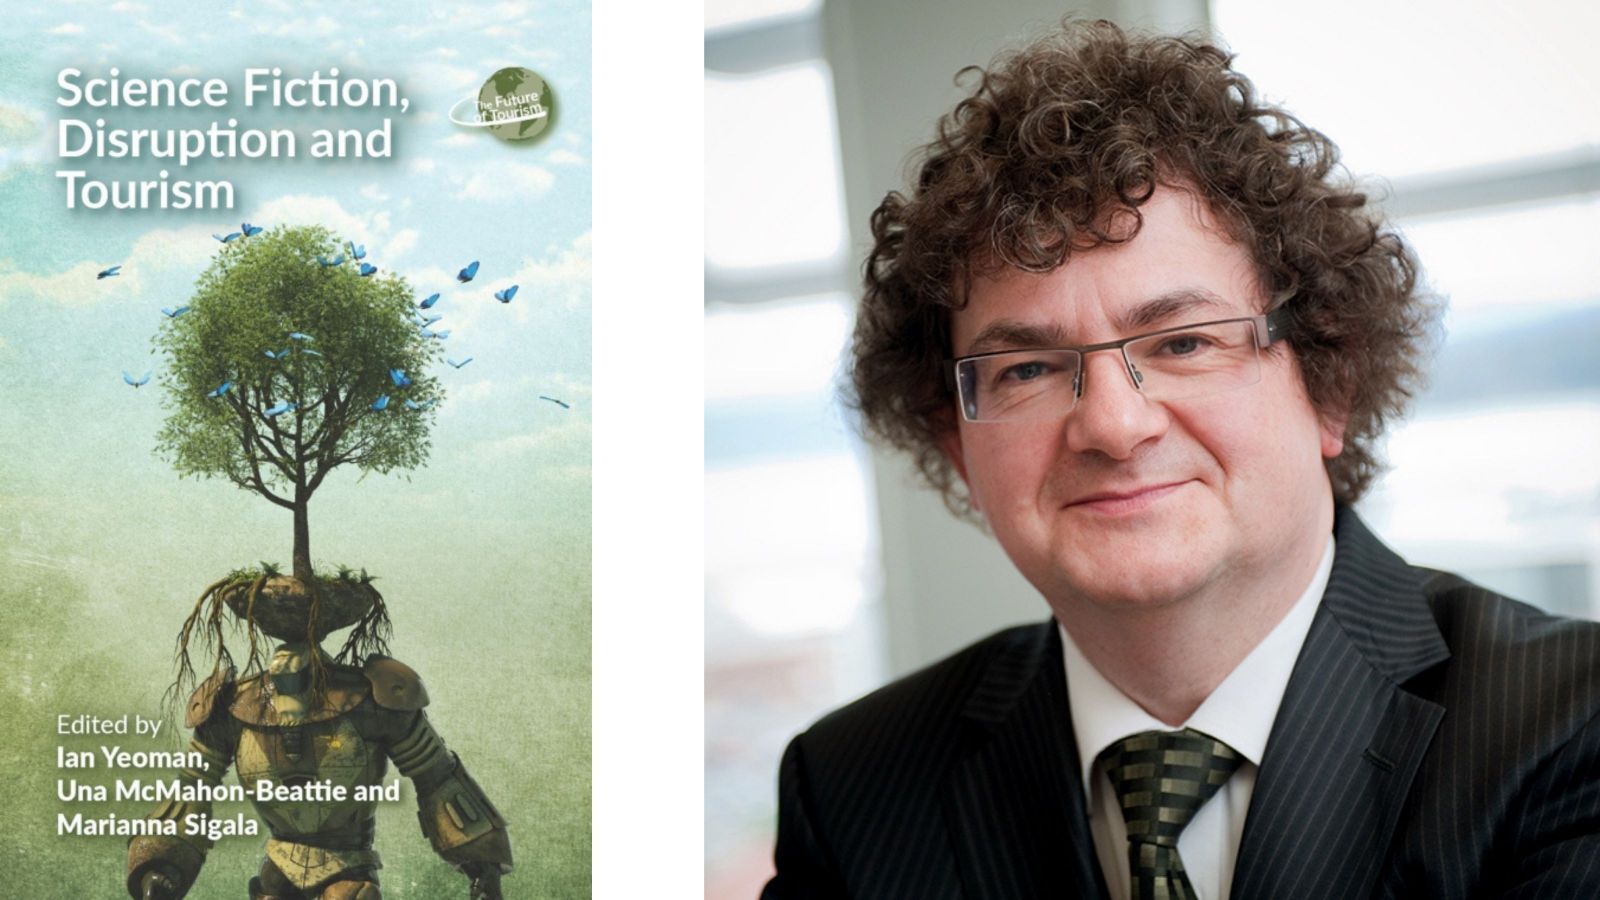 image of book cover titled science fiction and tourism, with a humanoid made from spare parts and trees. plus image of man smiling with curly dark hair, wearing a suit. 